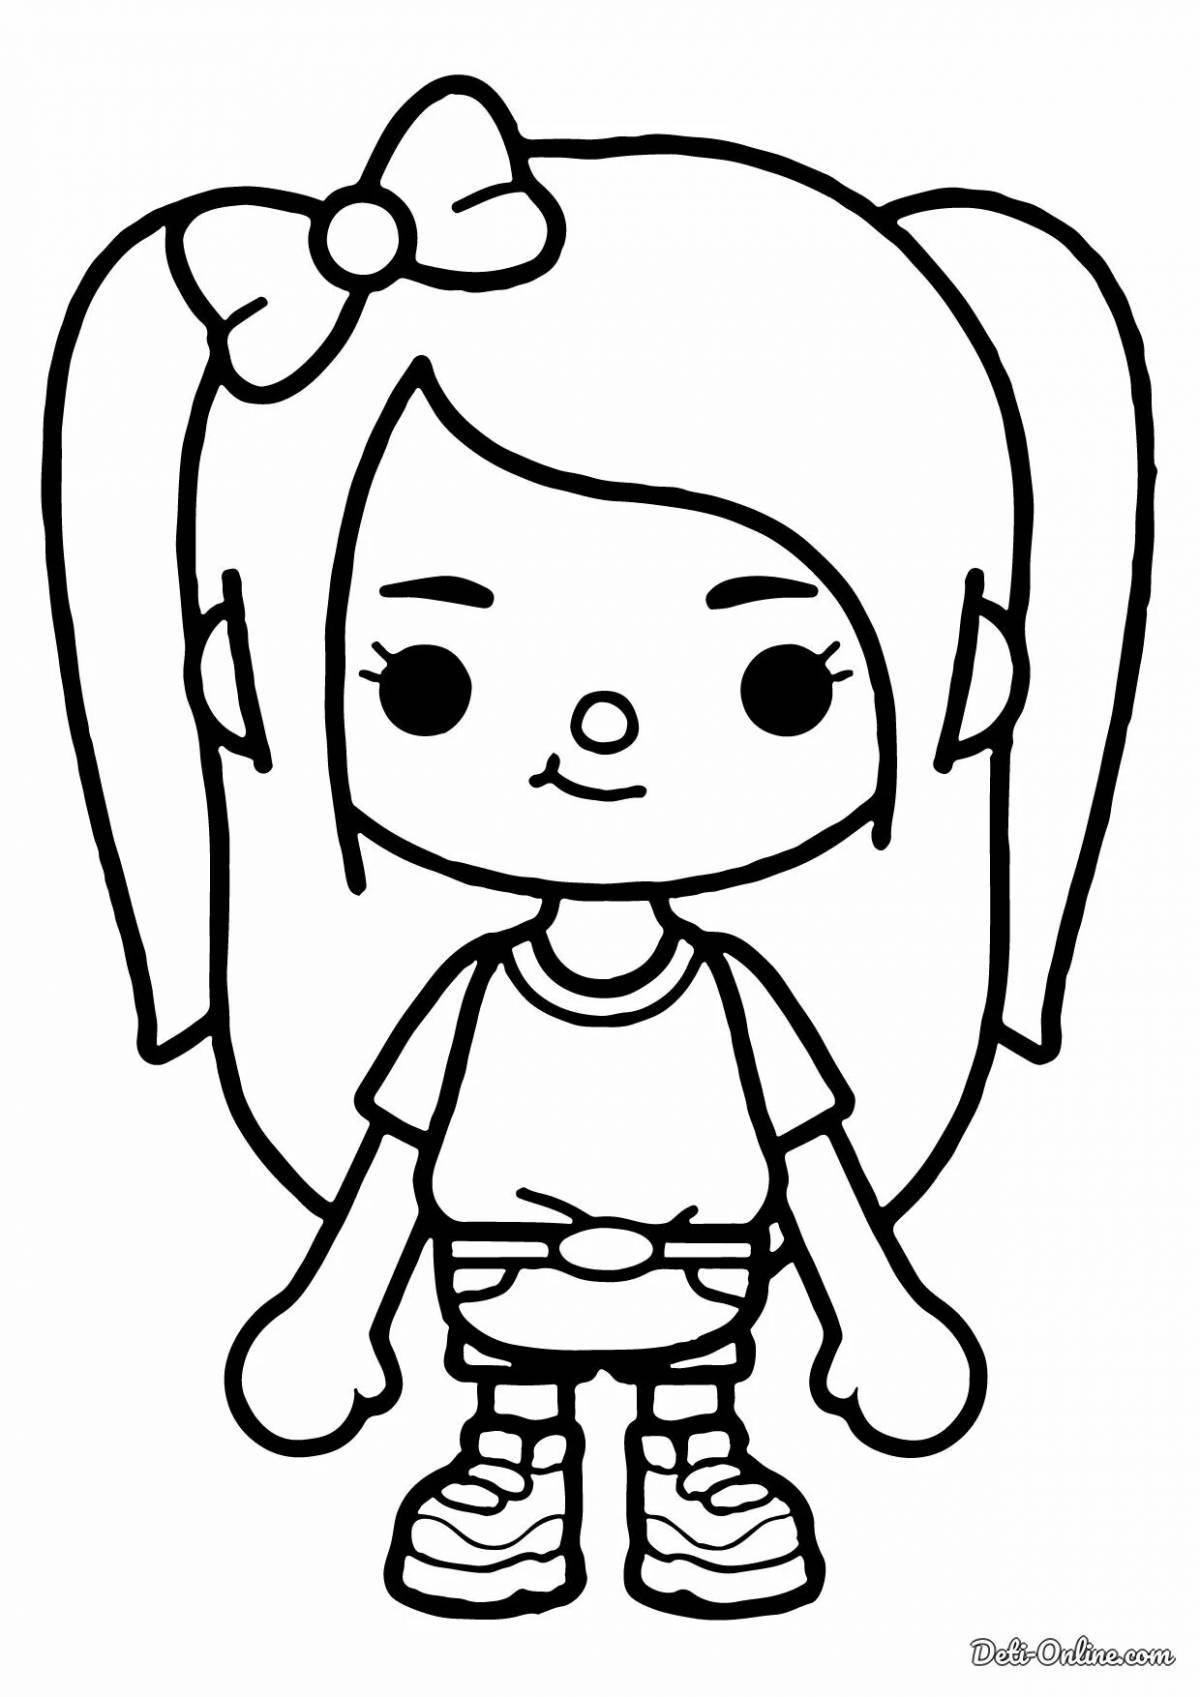 Adorable side chain current coloring page